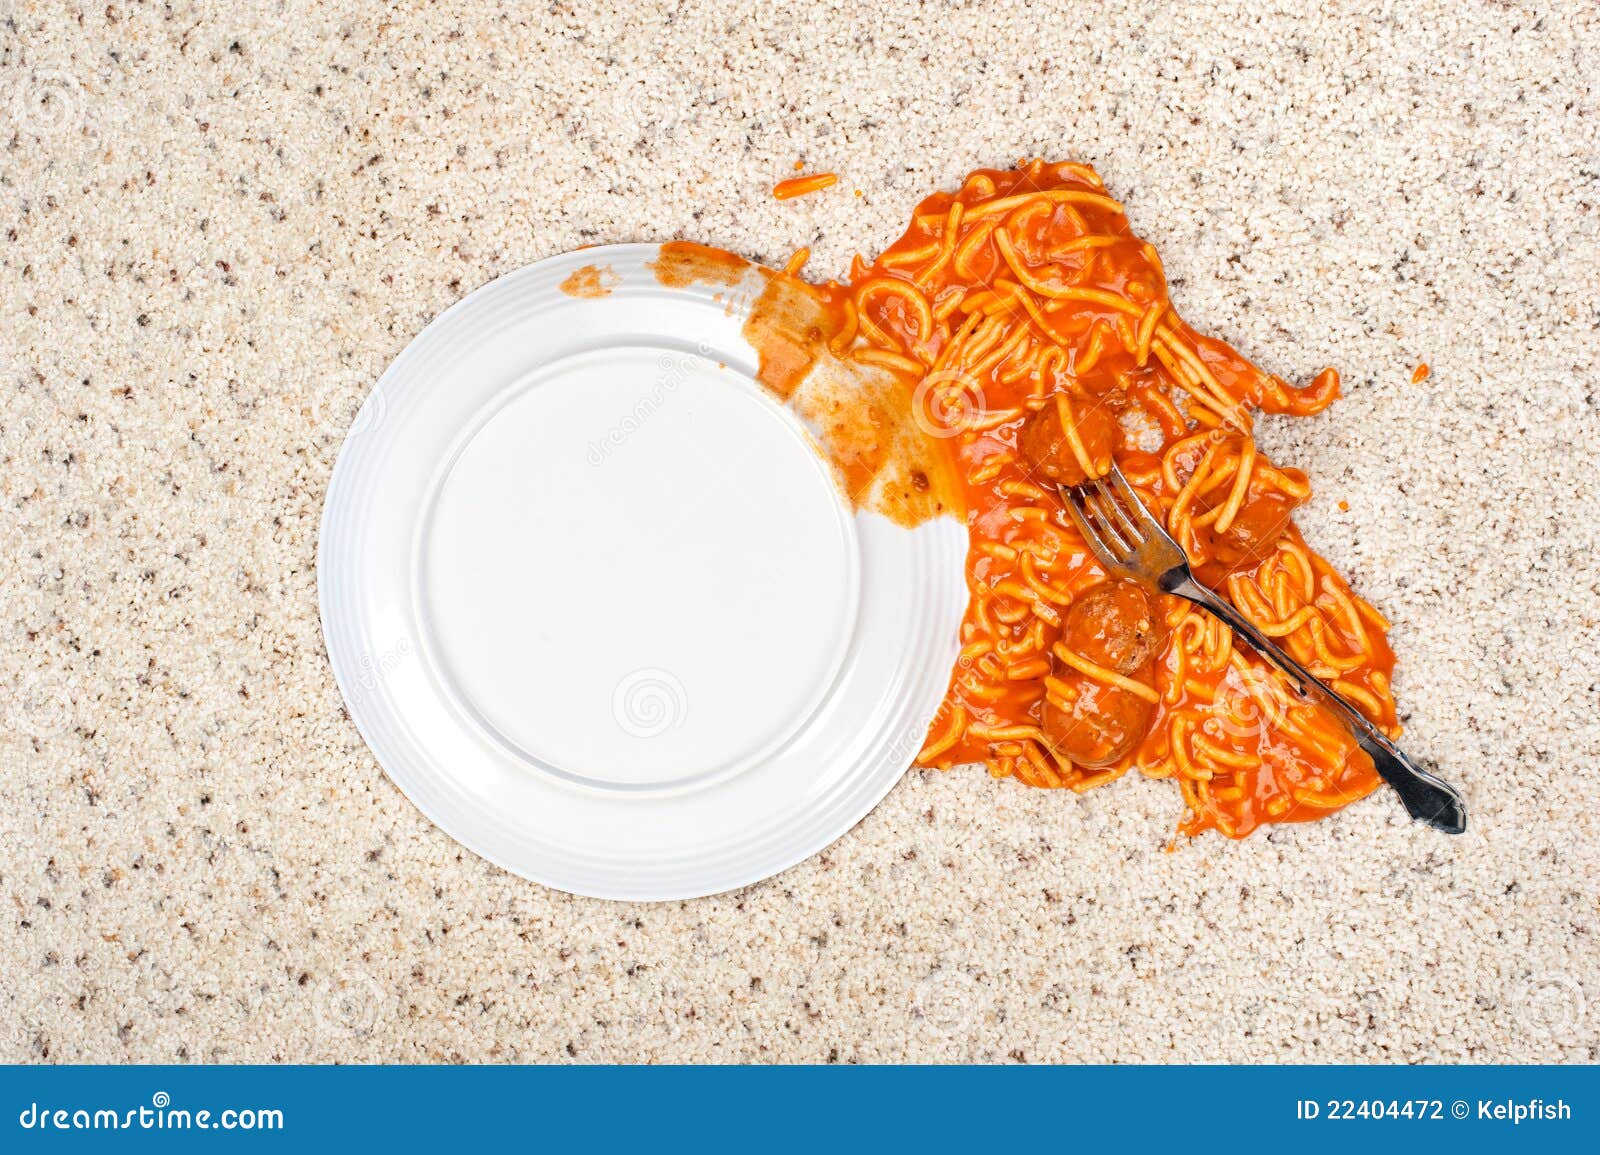 dropped plate of spaghetti on